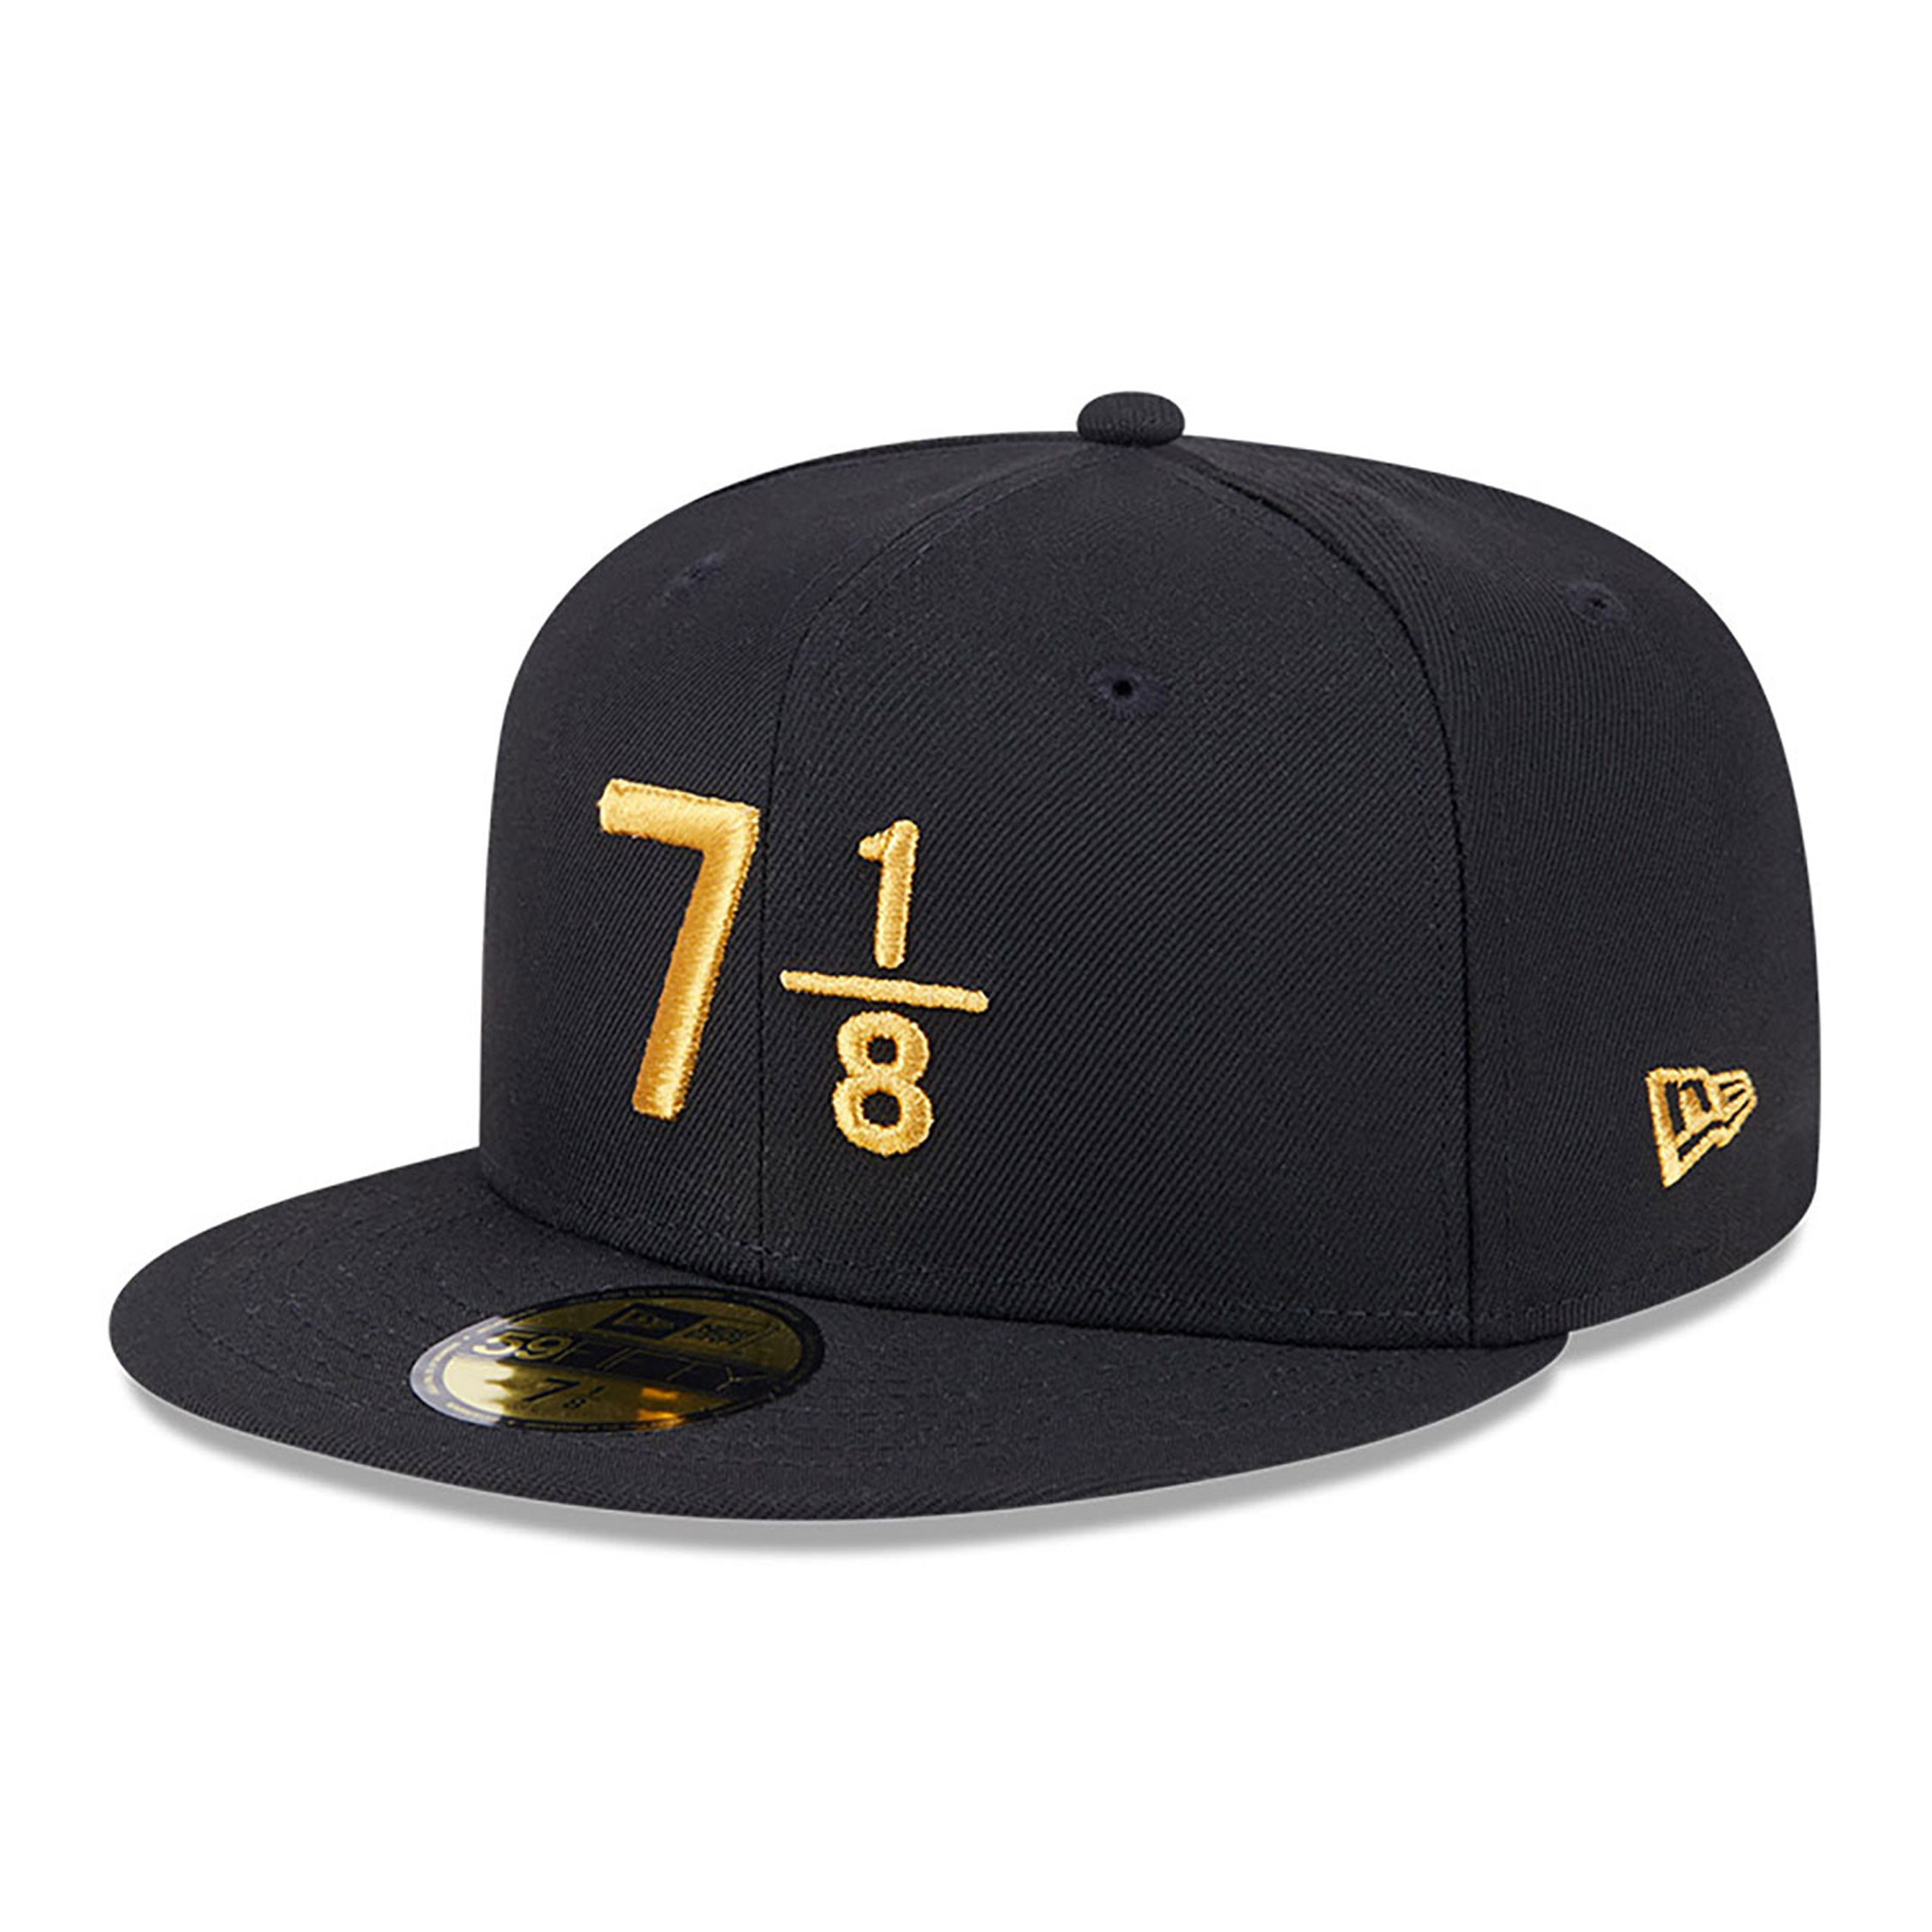 New Era 59FIFTY Day 7 1/8 Black 59FIFTY Fitted Cap